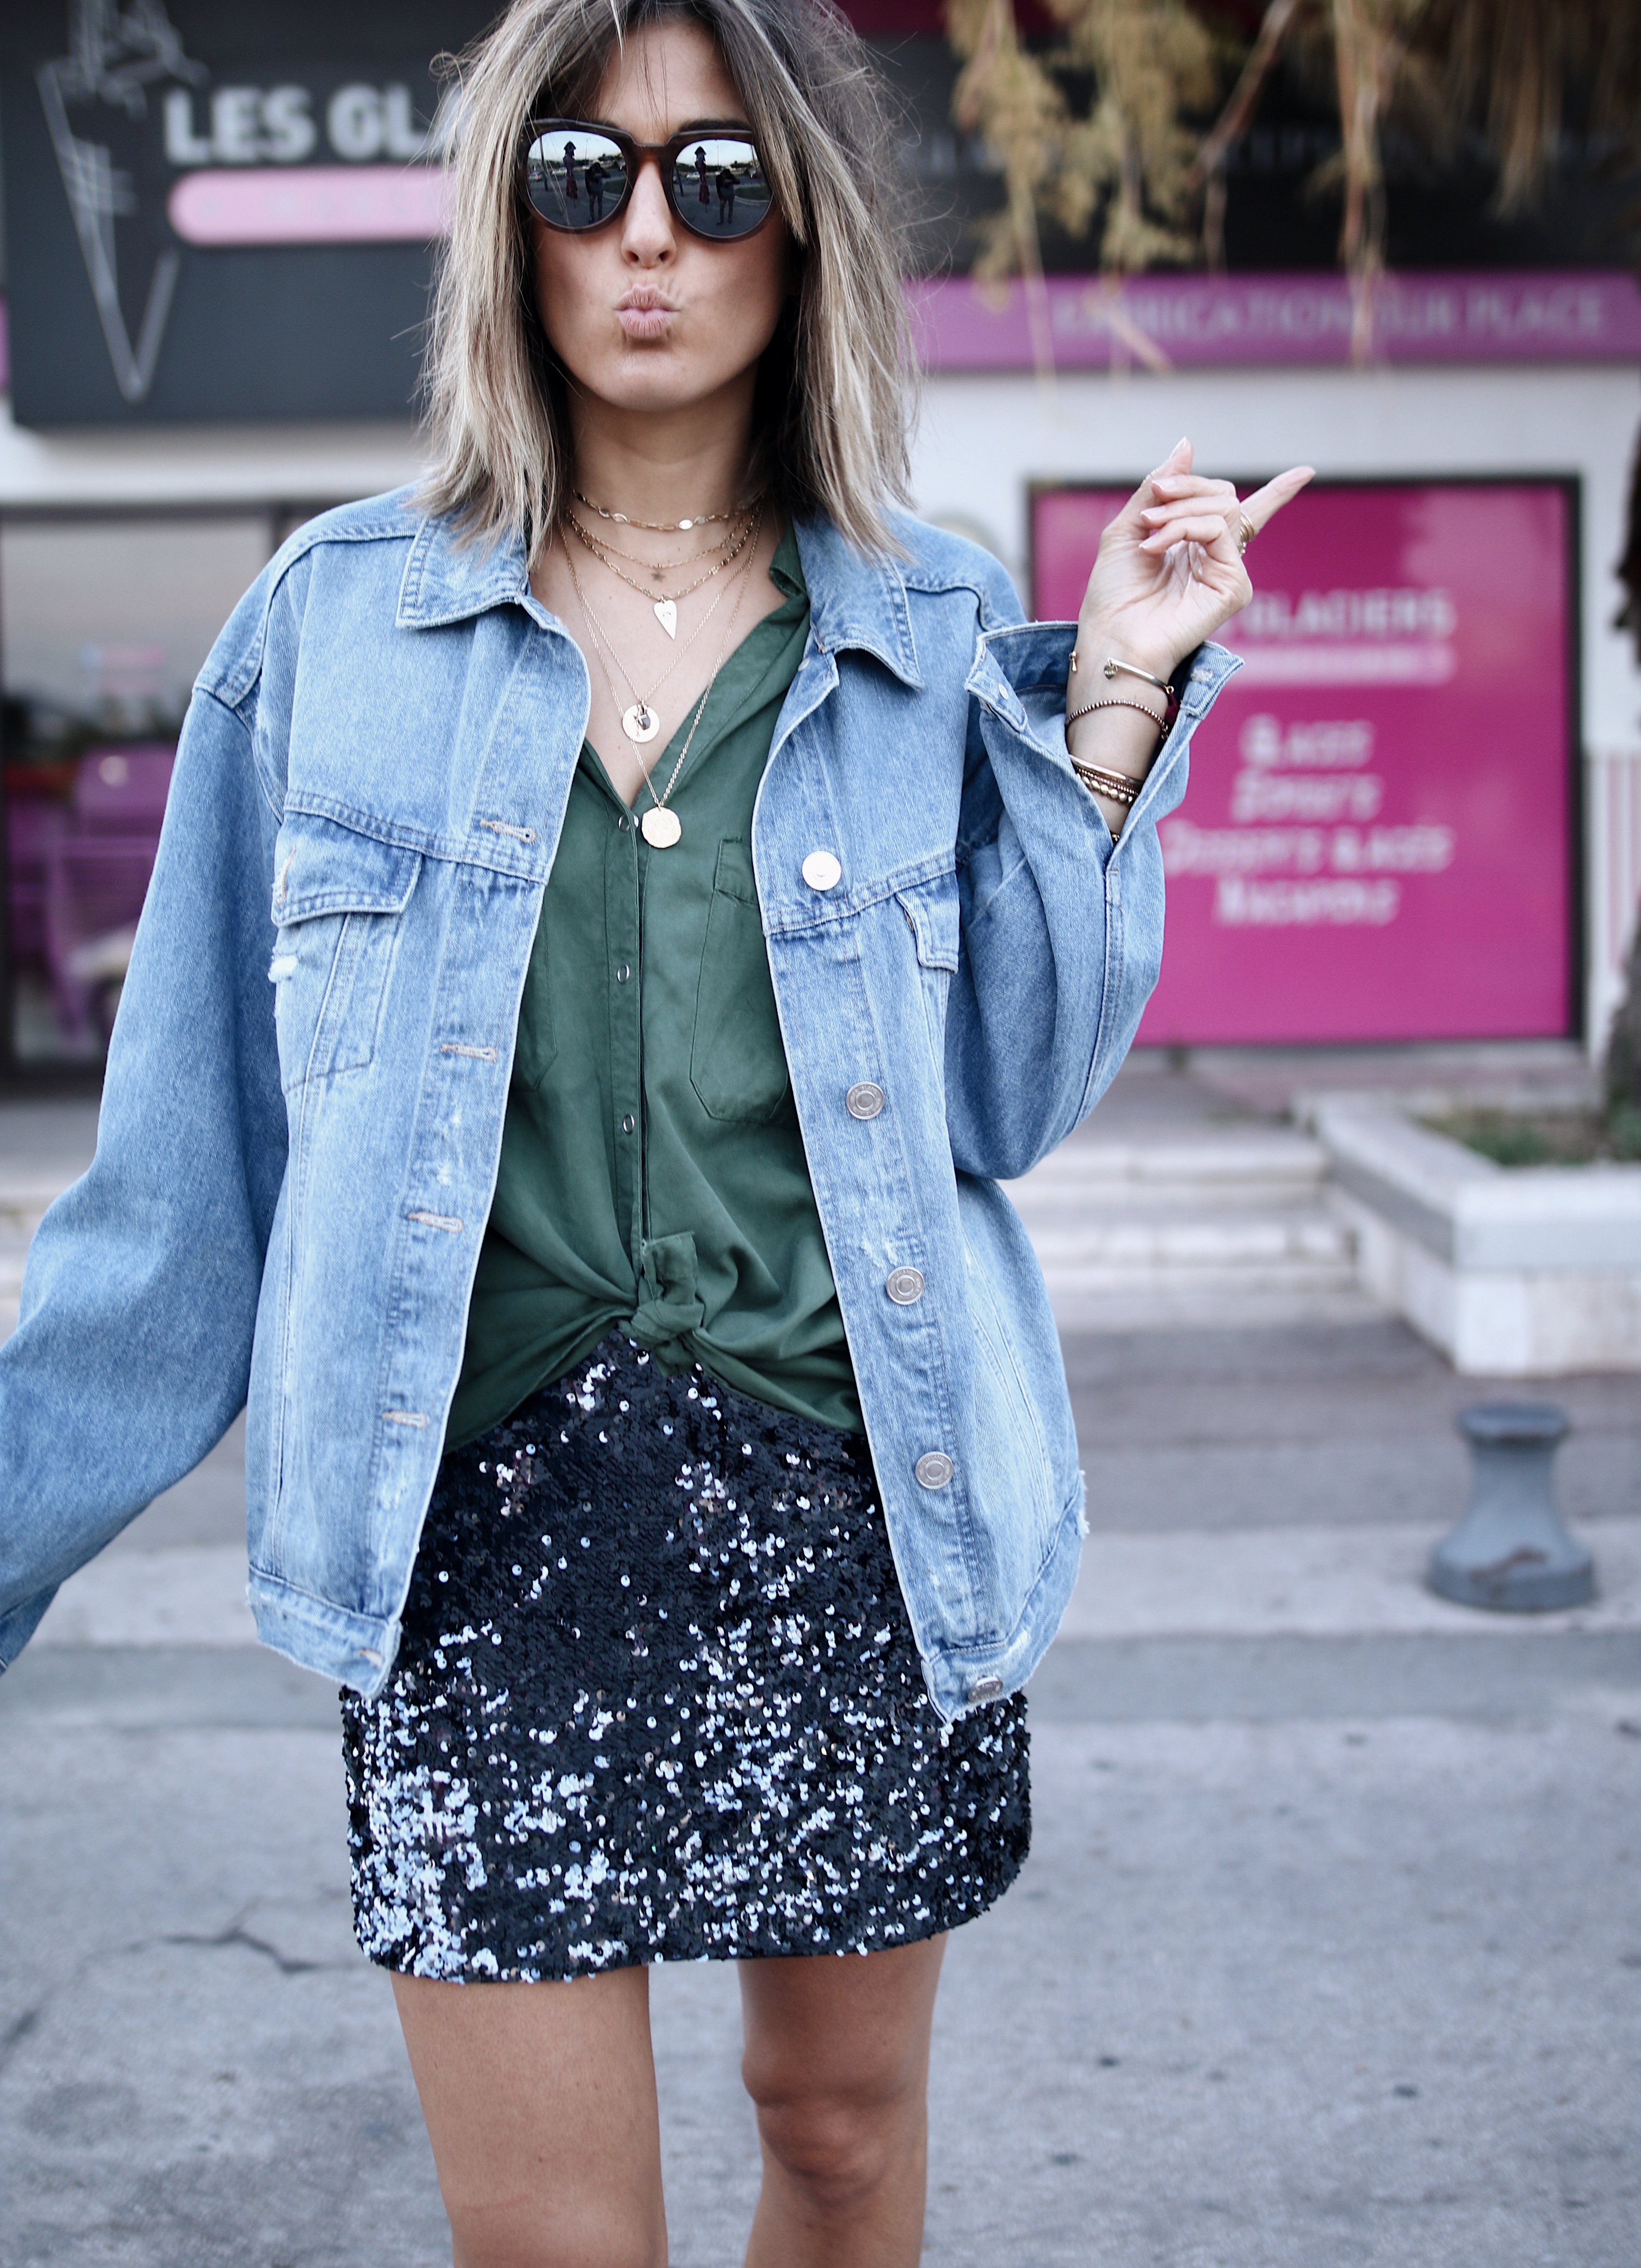 HOW TO STYLE SEQUIN SKIRT WITH DENIM JACKET AND VANS SNEAKERS 